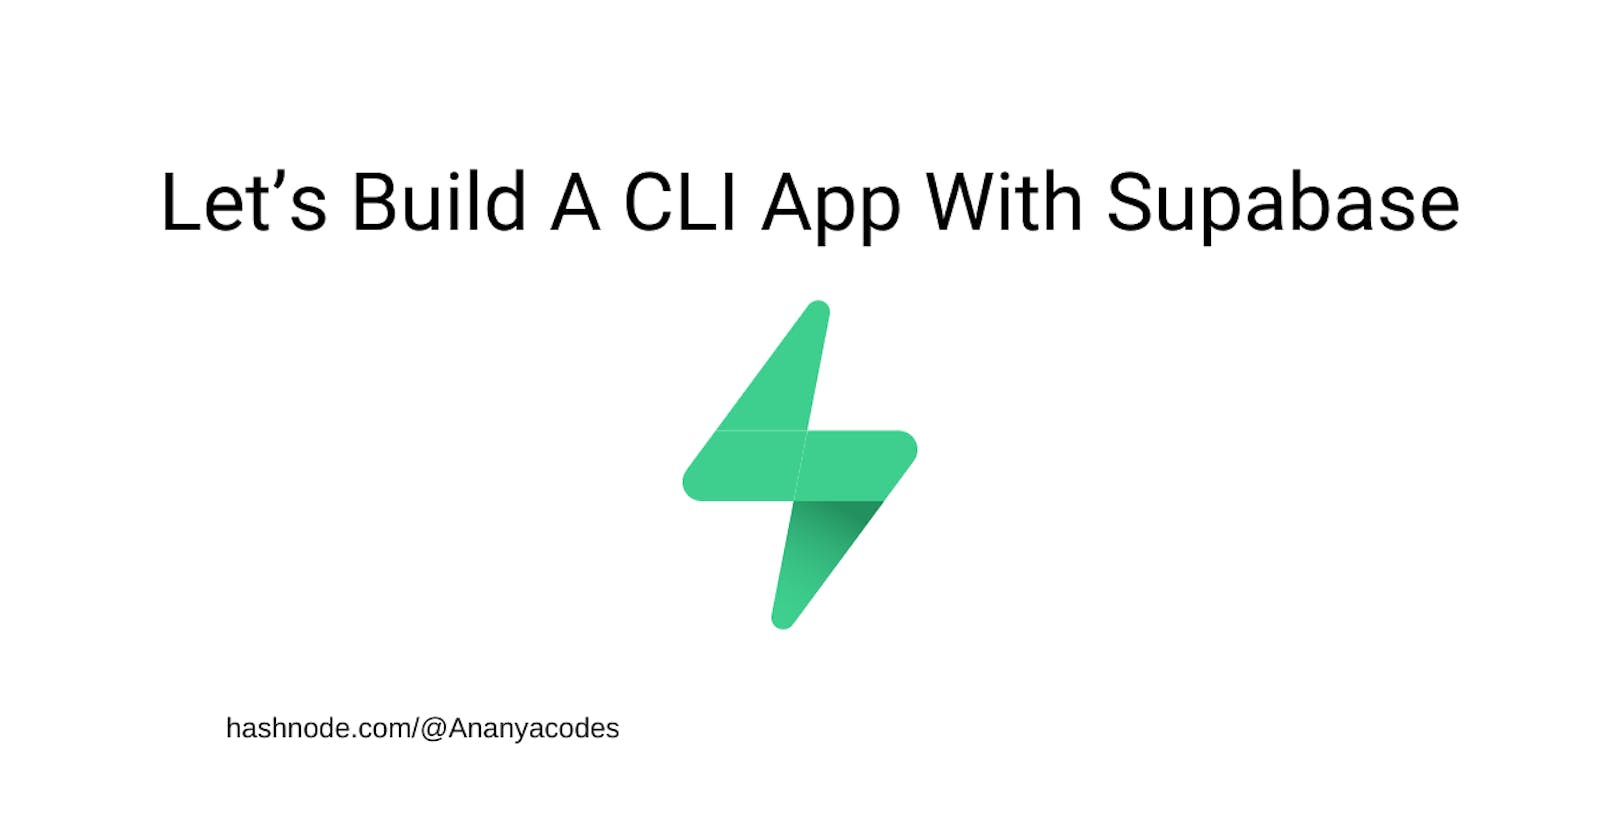 Let's build a CLI app with Supabase⚡